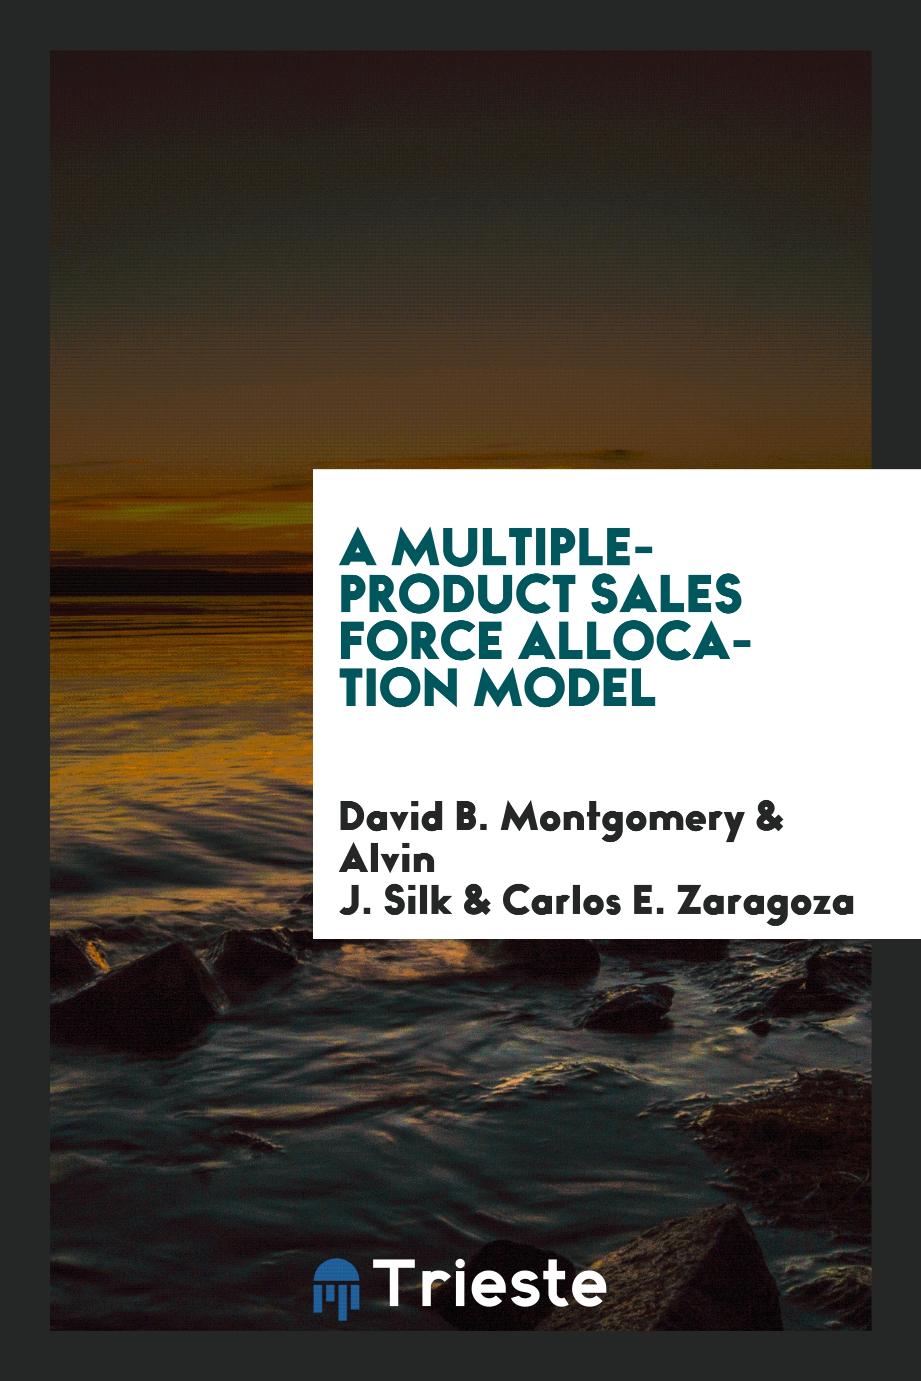 A multiple-product sales force allocation model